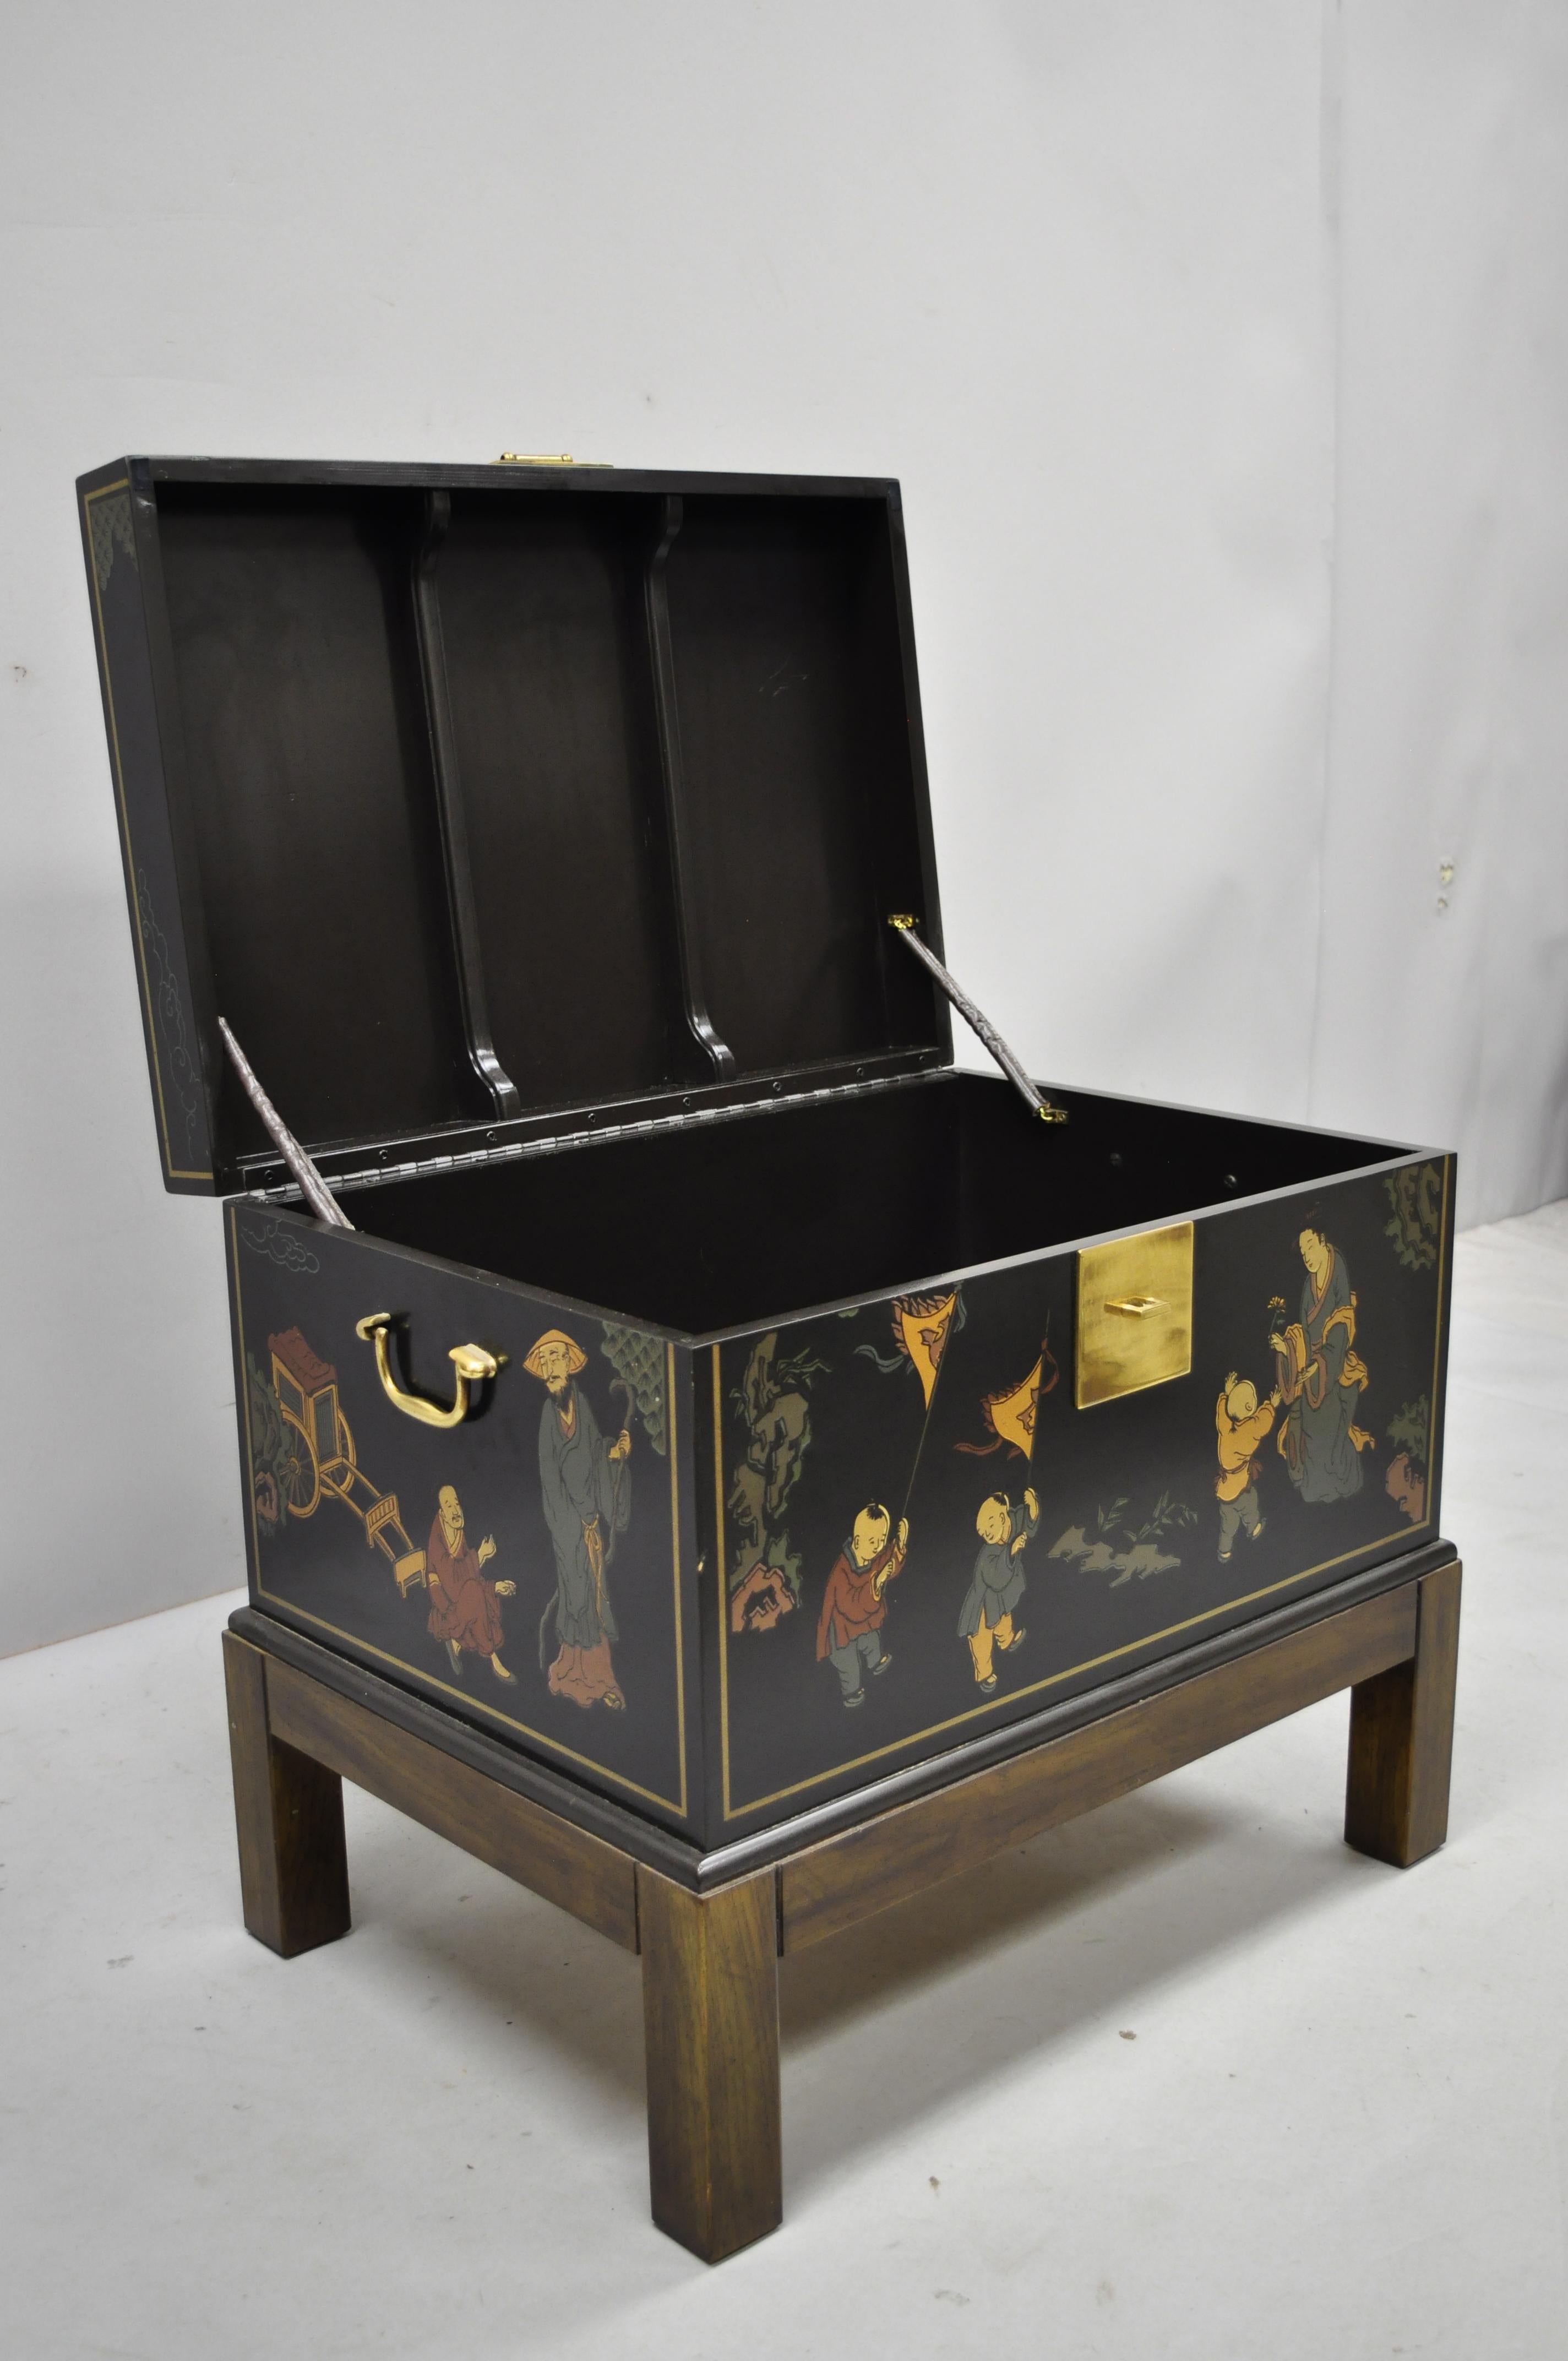 Vintage Drexel Et Cetera black chinoiserie oriental storage trunk chest. Listing features hand painted details, wood construction, serial number (584 150), solid brass hardware, quality American craftsmanship, circa mid-20th century. Measurements: